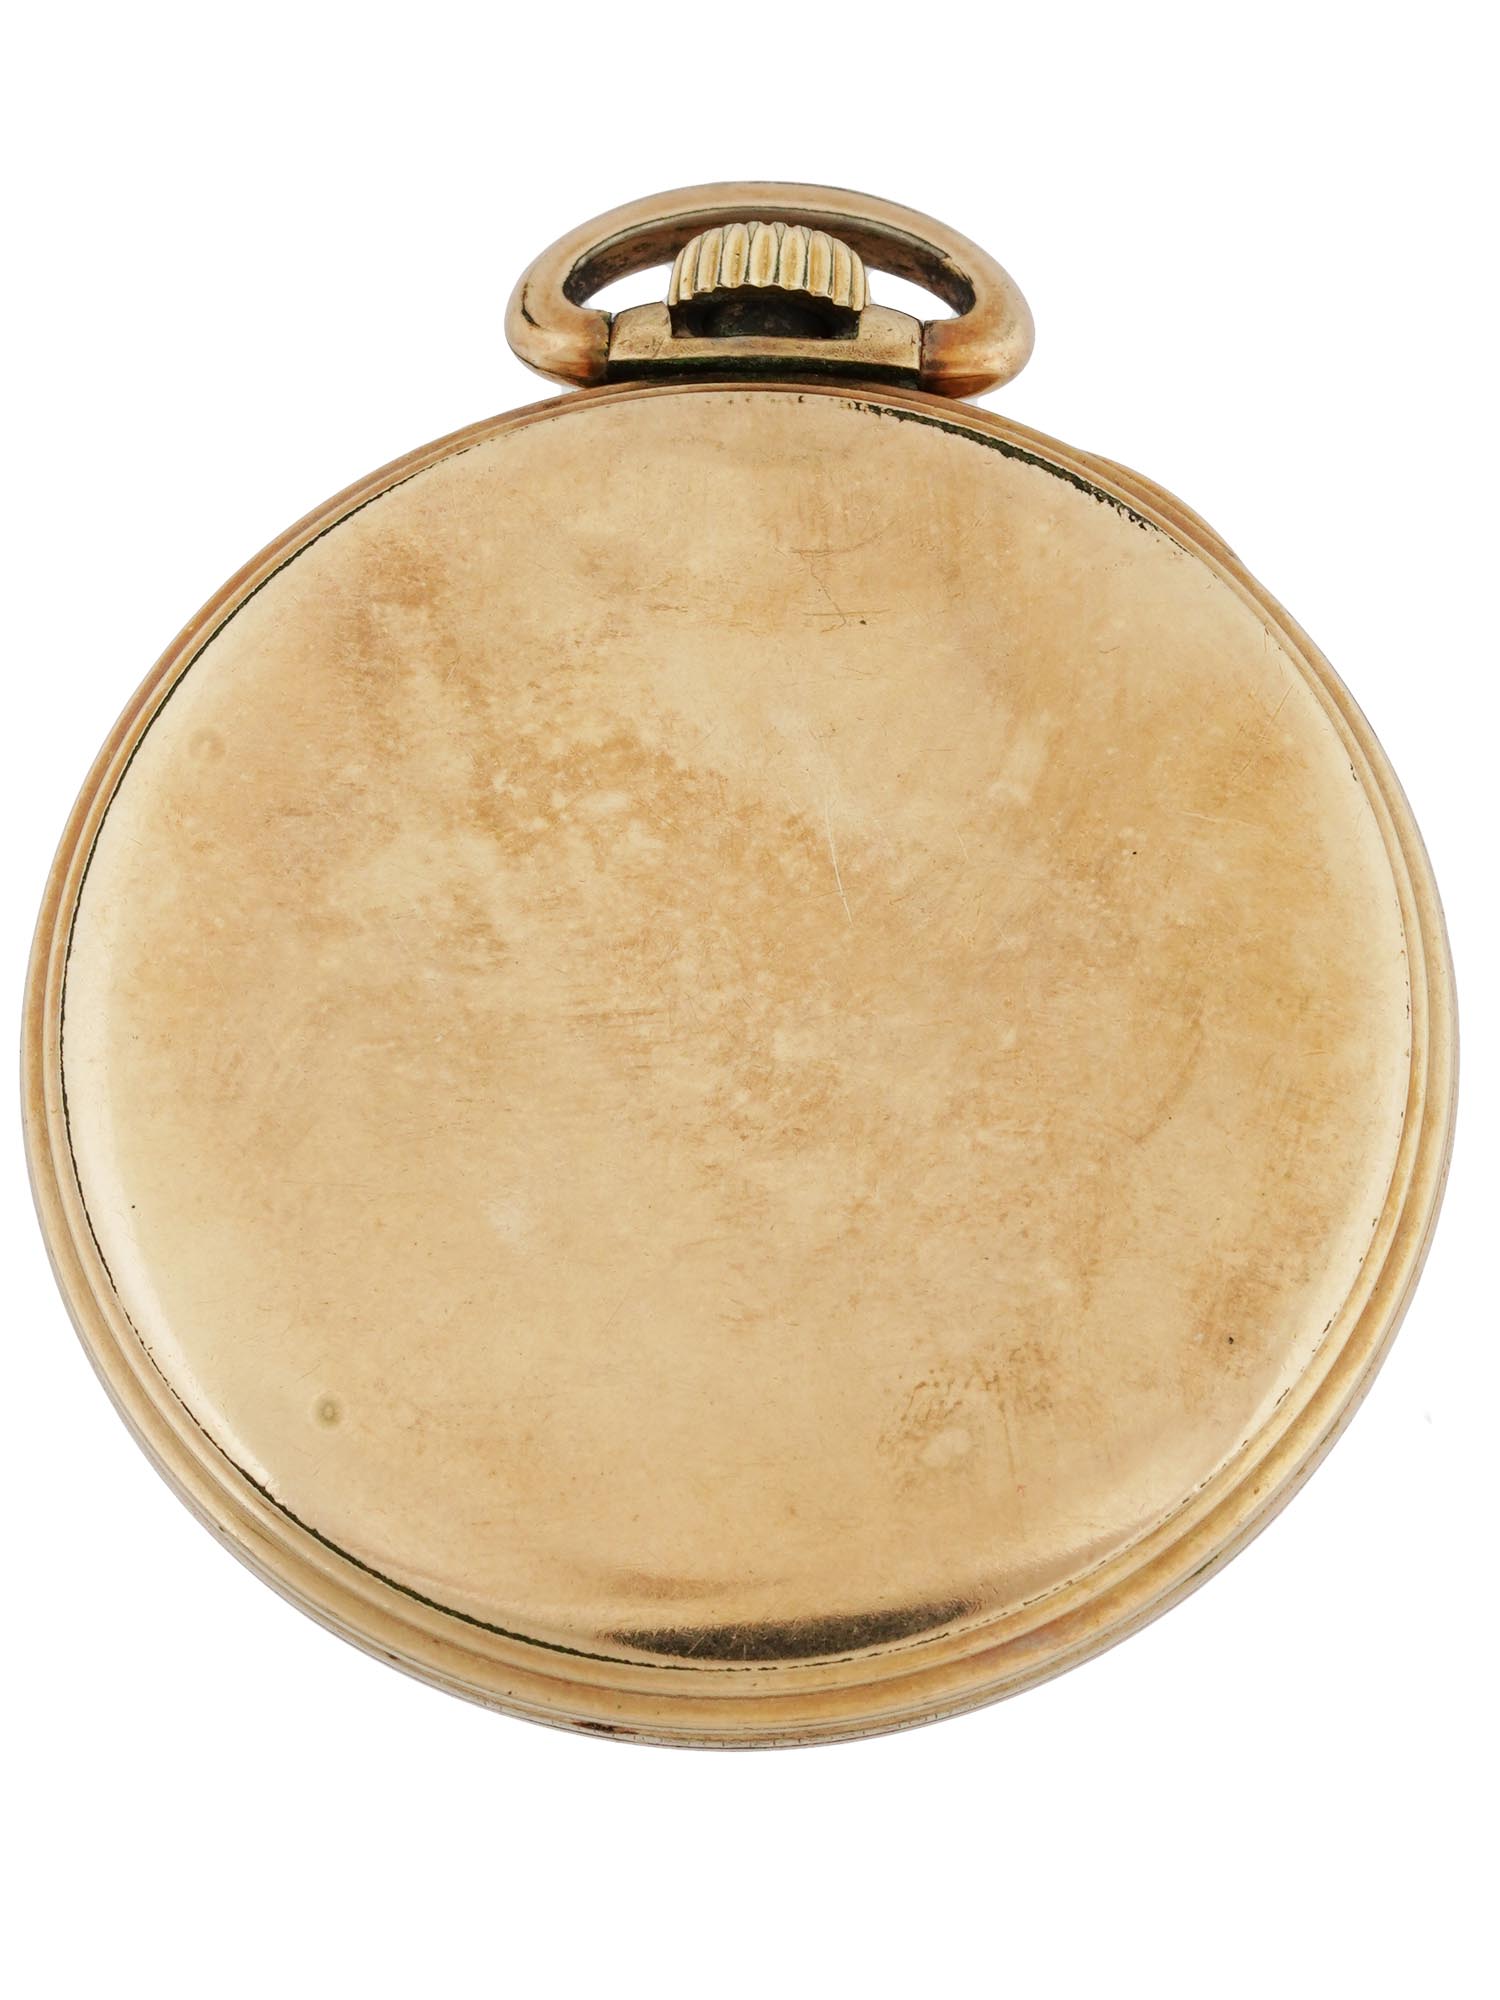 MID CENT WALTHAM PREMIER GOLD PLATED POCKET WATCH PIC-1